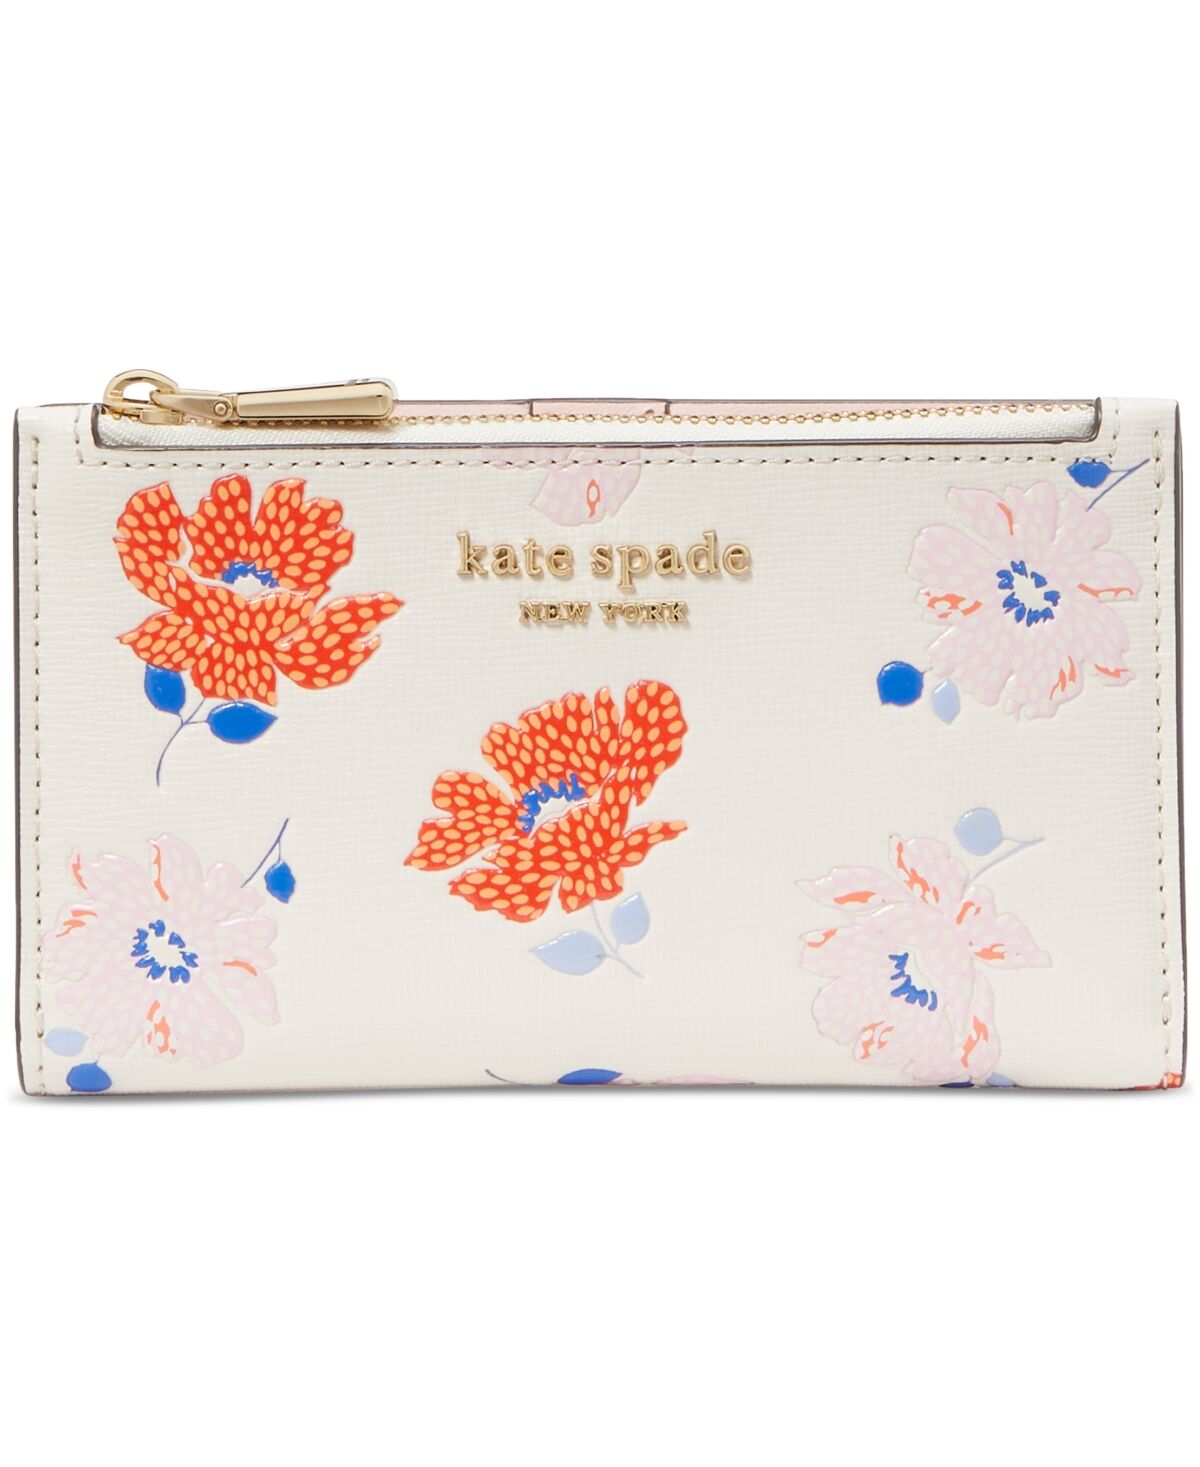 Kate Spade New York Morgan Dotty Floral Embossed Saffiano Leather Small Slim Bifold Wallet - White Multi